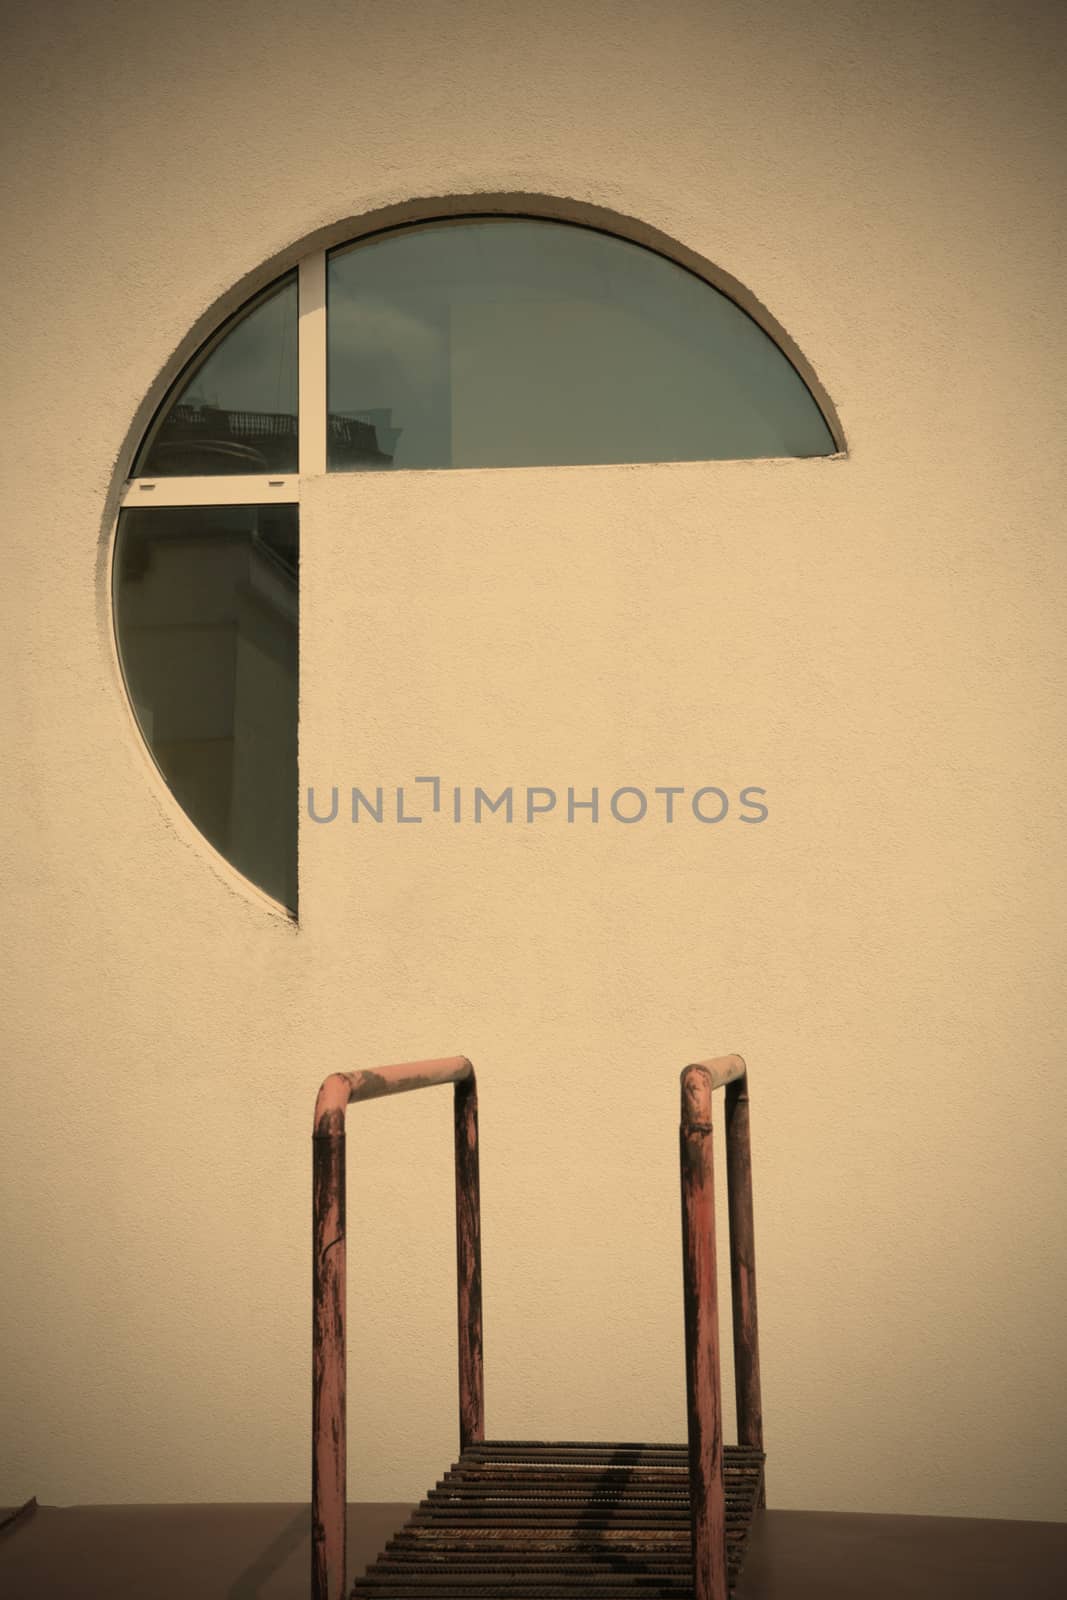 abstraction, architectral fragments of the modern building, futuristic window in concrete wall and metallic banisters, instagram image style